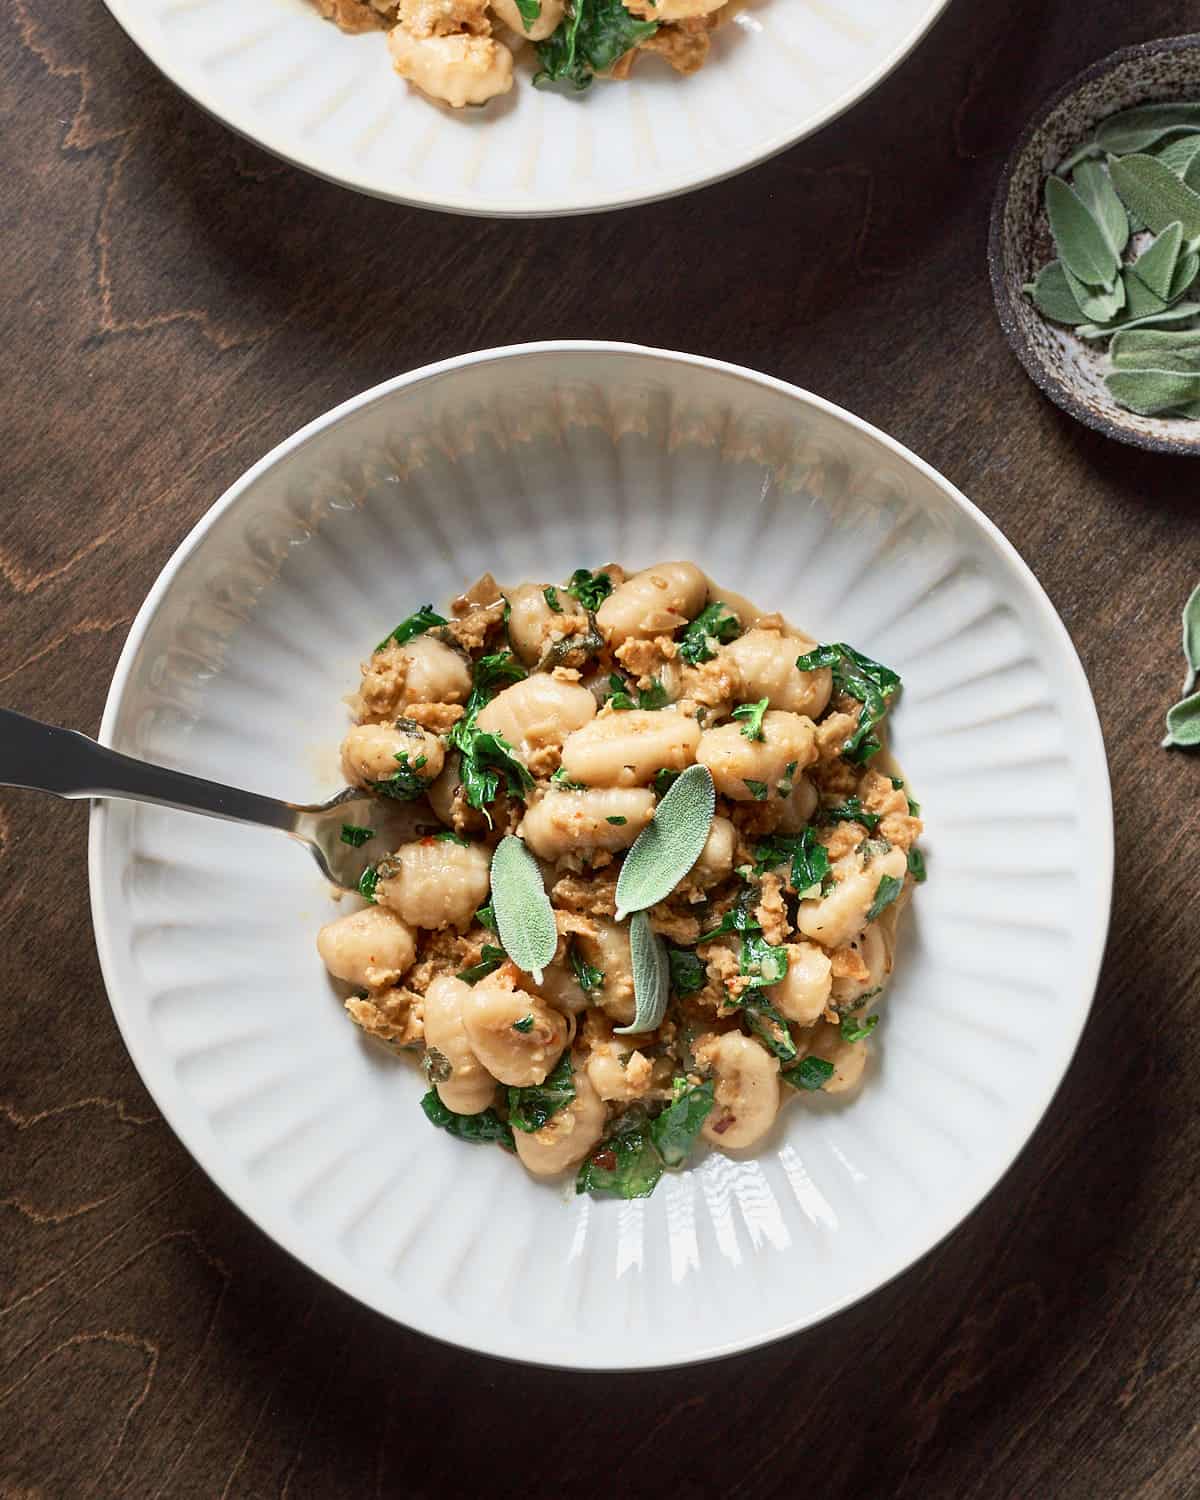 Overhead view of vegan gnocchi with sausage and kale on a wood background.